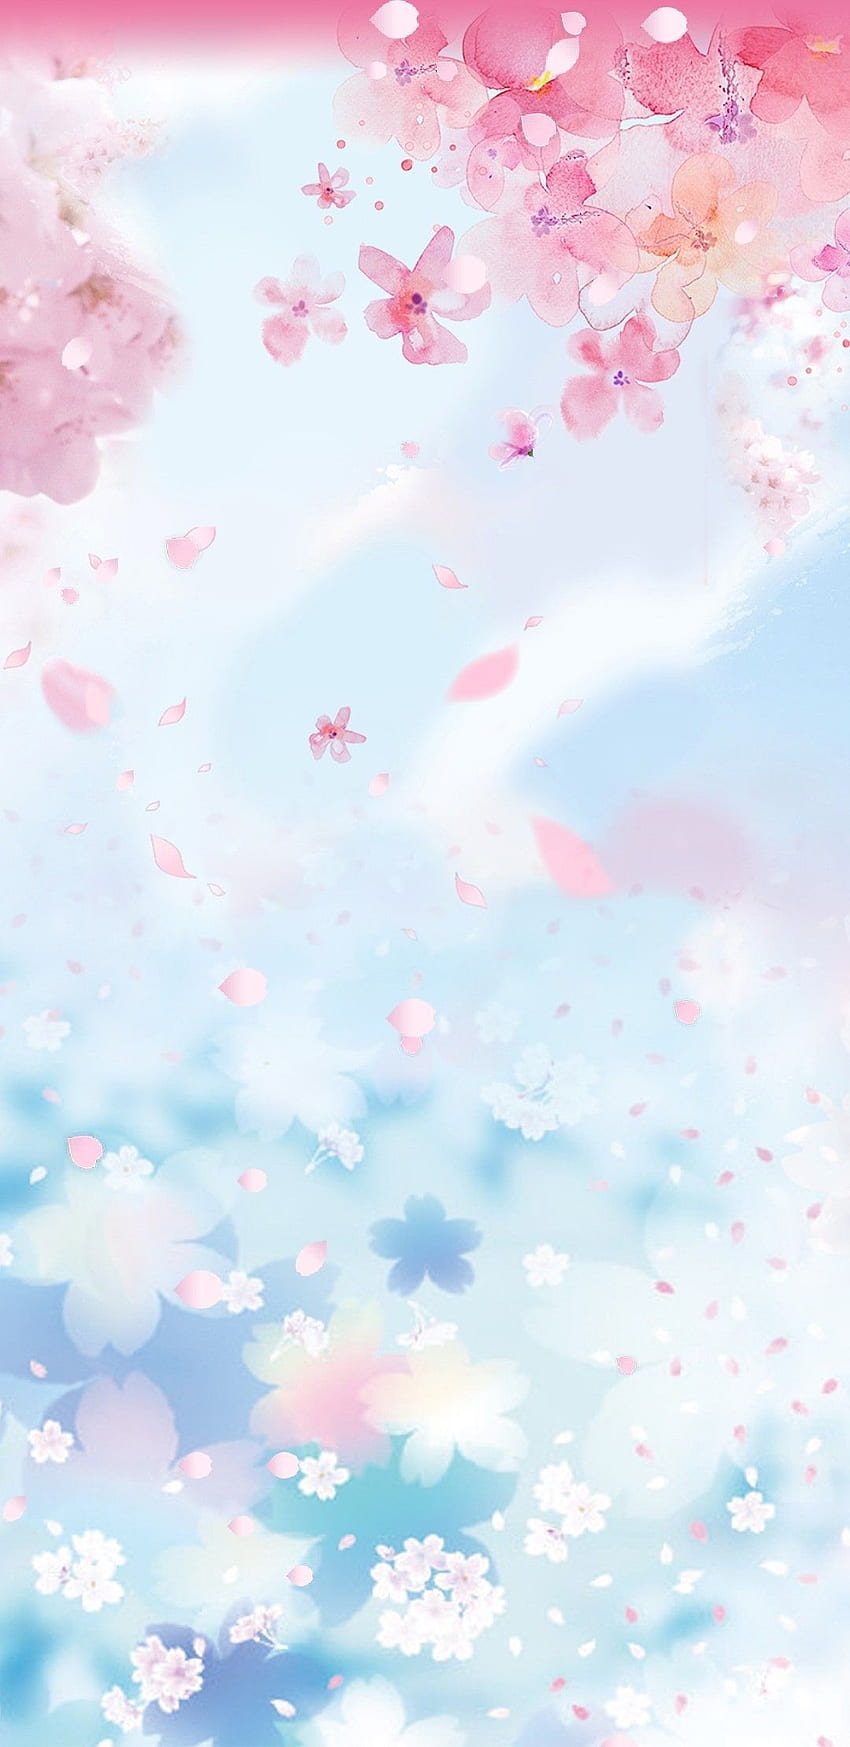 Most Latest Anime IPhone Pastel. Cherry blossom , Cherry blossom iphone, Flower background, Cute Anime Flower HD phone wallpaper